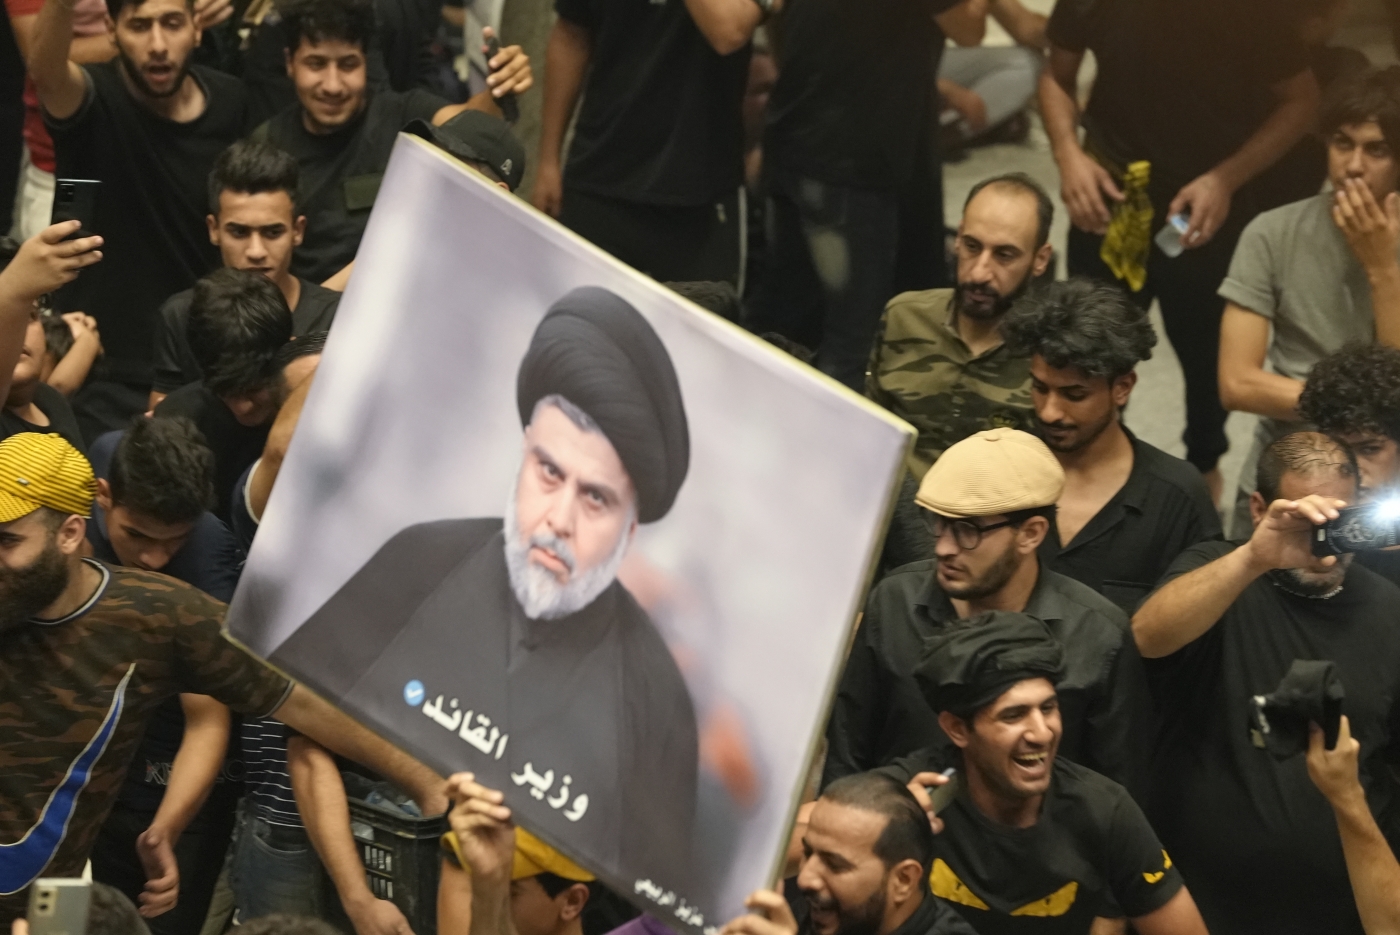 Sadrists hold up a photo of Shia Cleric Muqtada al-Sadr during protest outside Iraq's parliament in Baghdad (MEE/Azhar Al-Rubaie)